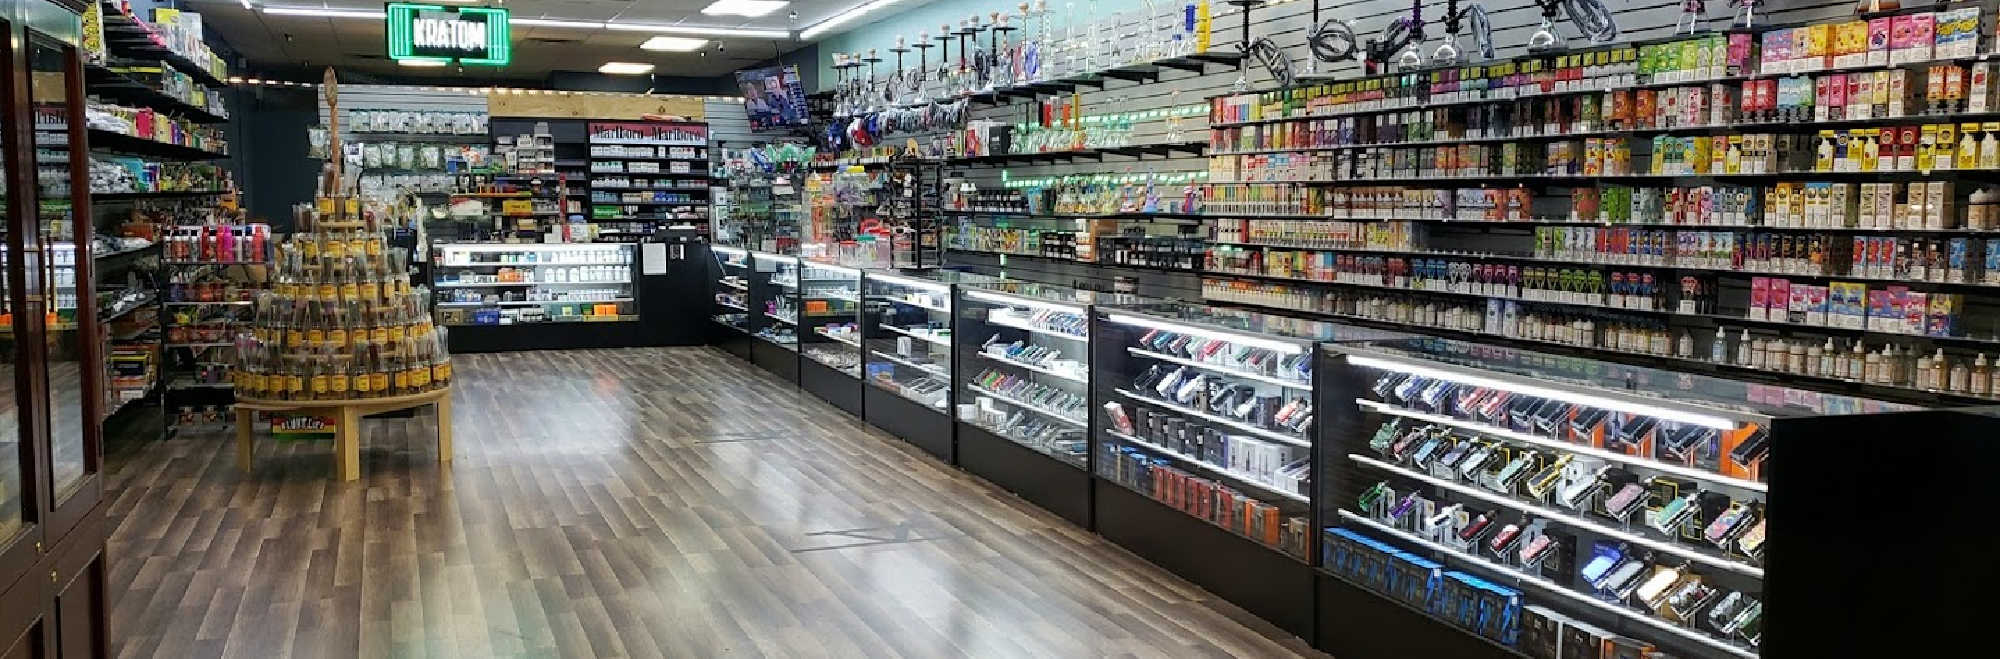 image of rock hill tobacco and vape in rock hill sc